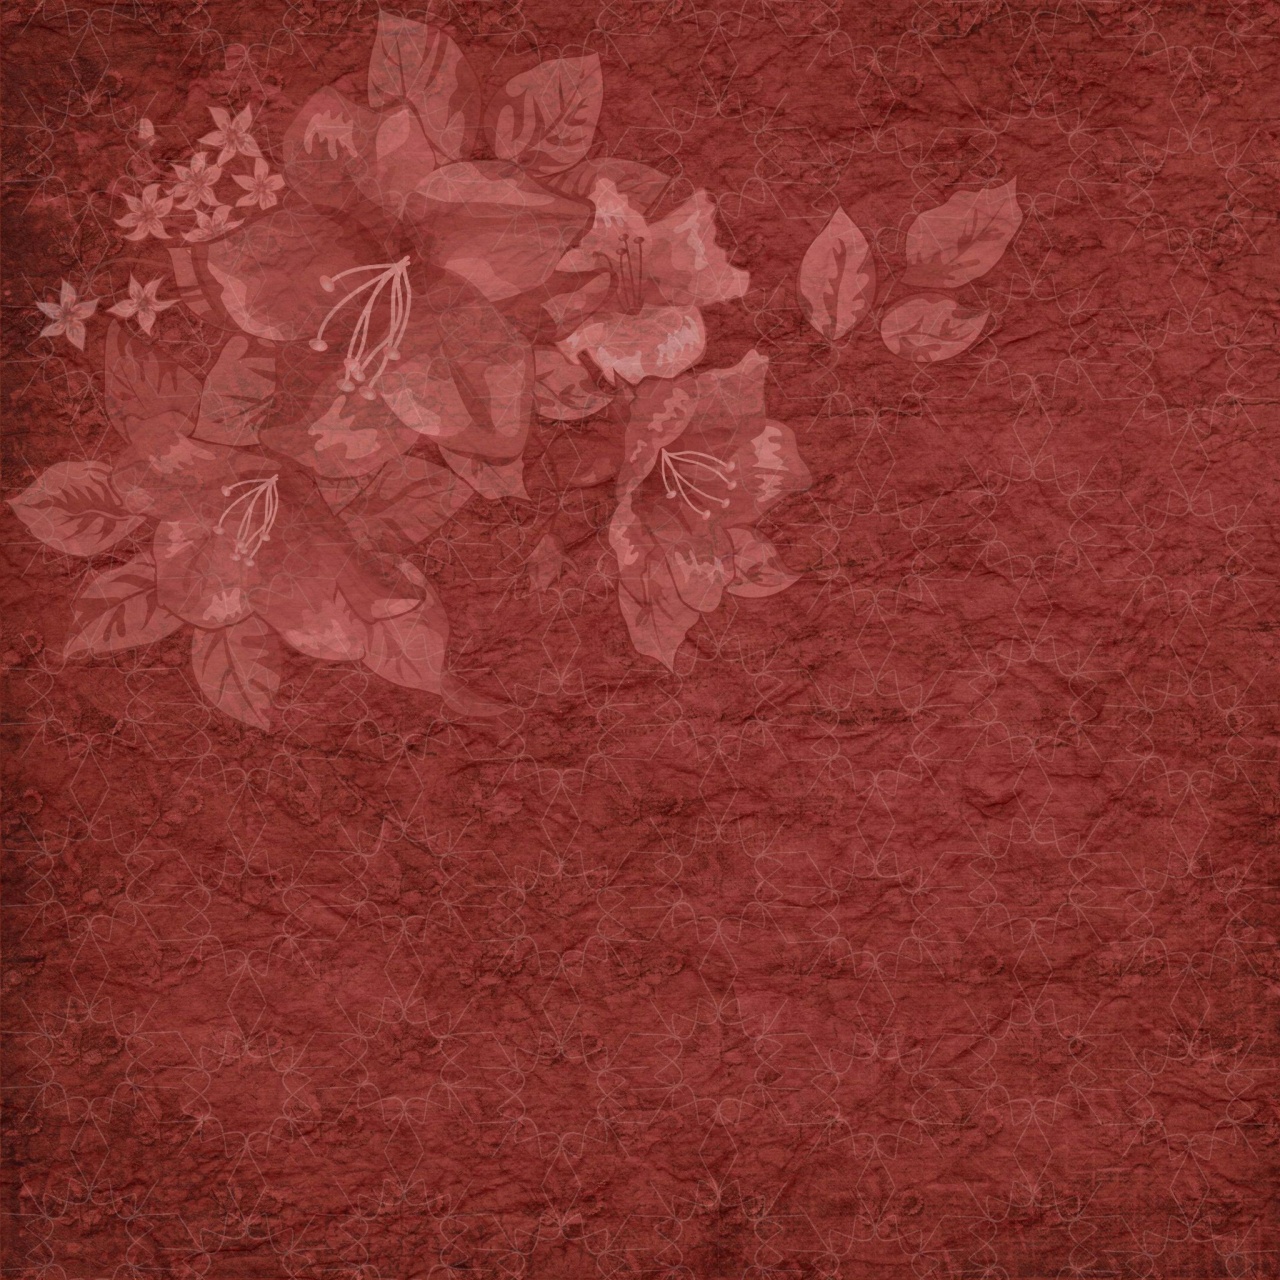 Flowers on a Red Background